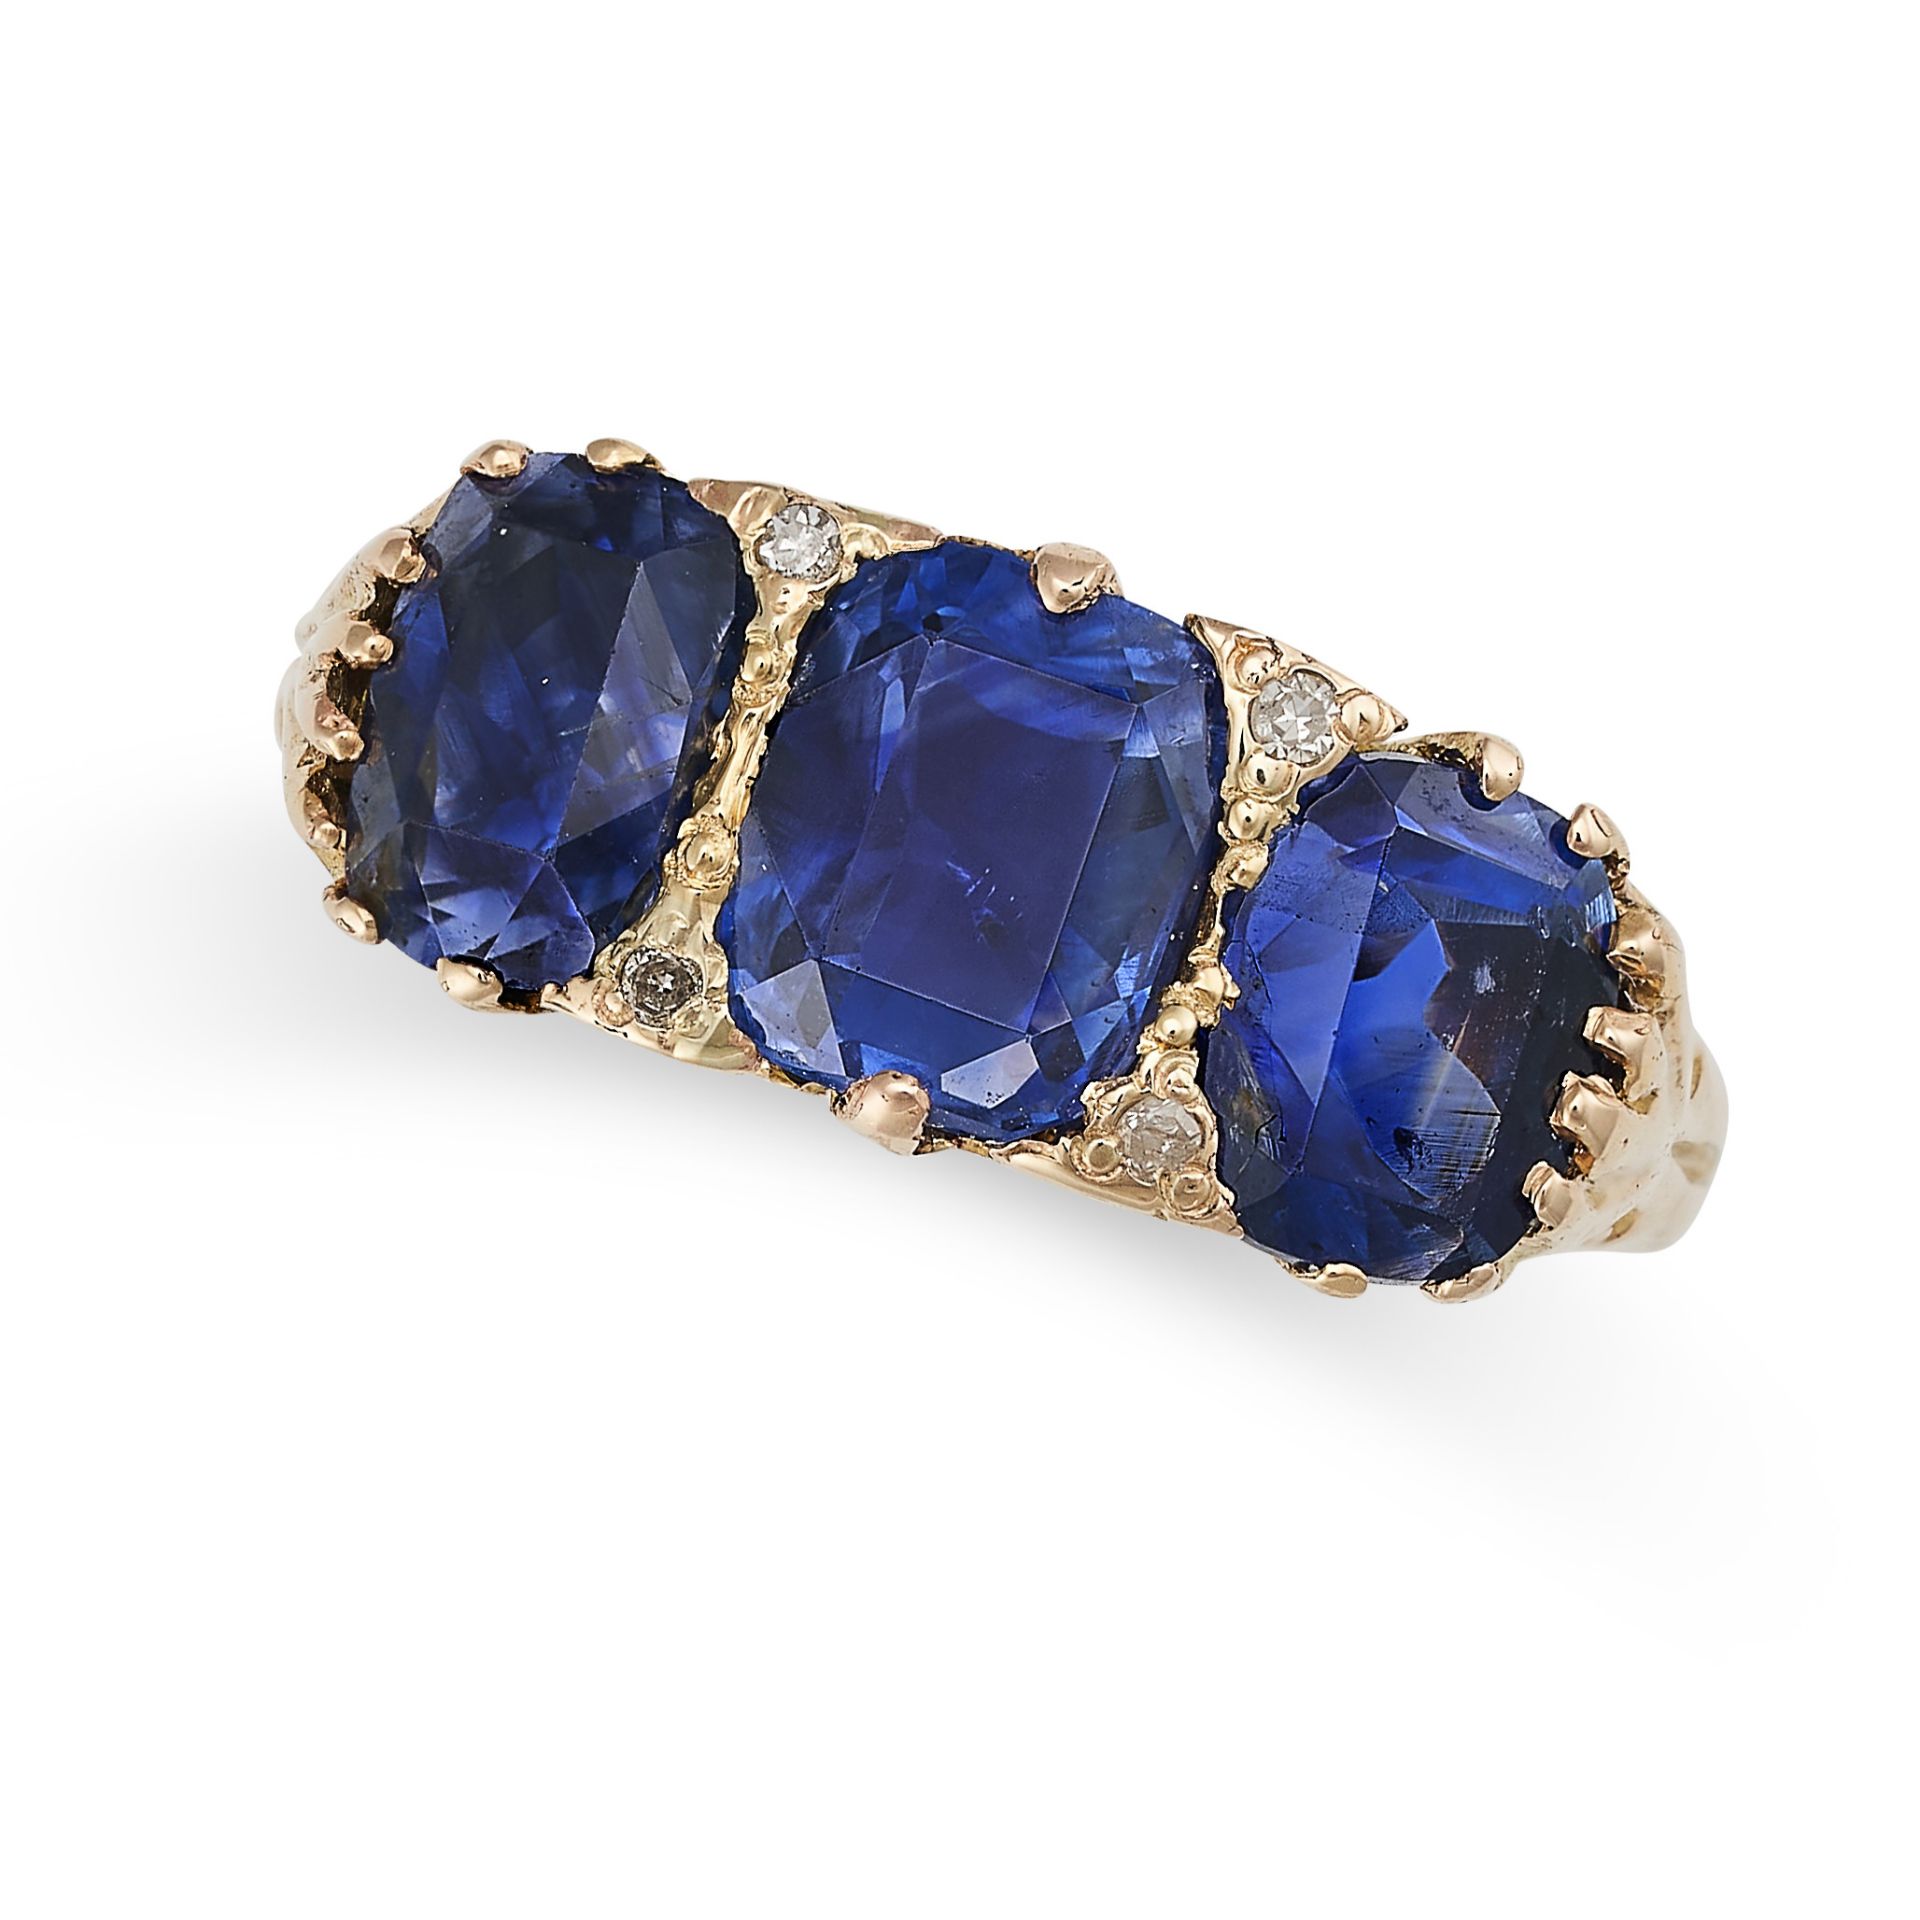 A SAPPHIRE AND DIAMOND DRESS RING in 18ct yellow gold, set with a trio of cushion cut blue